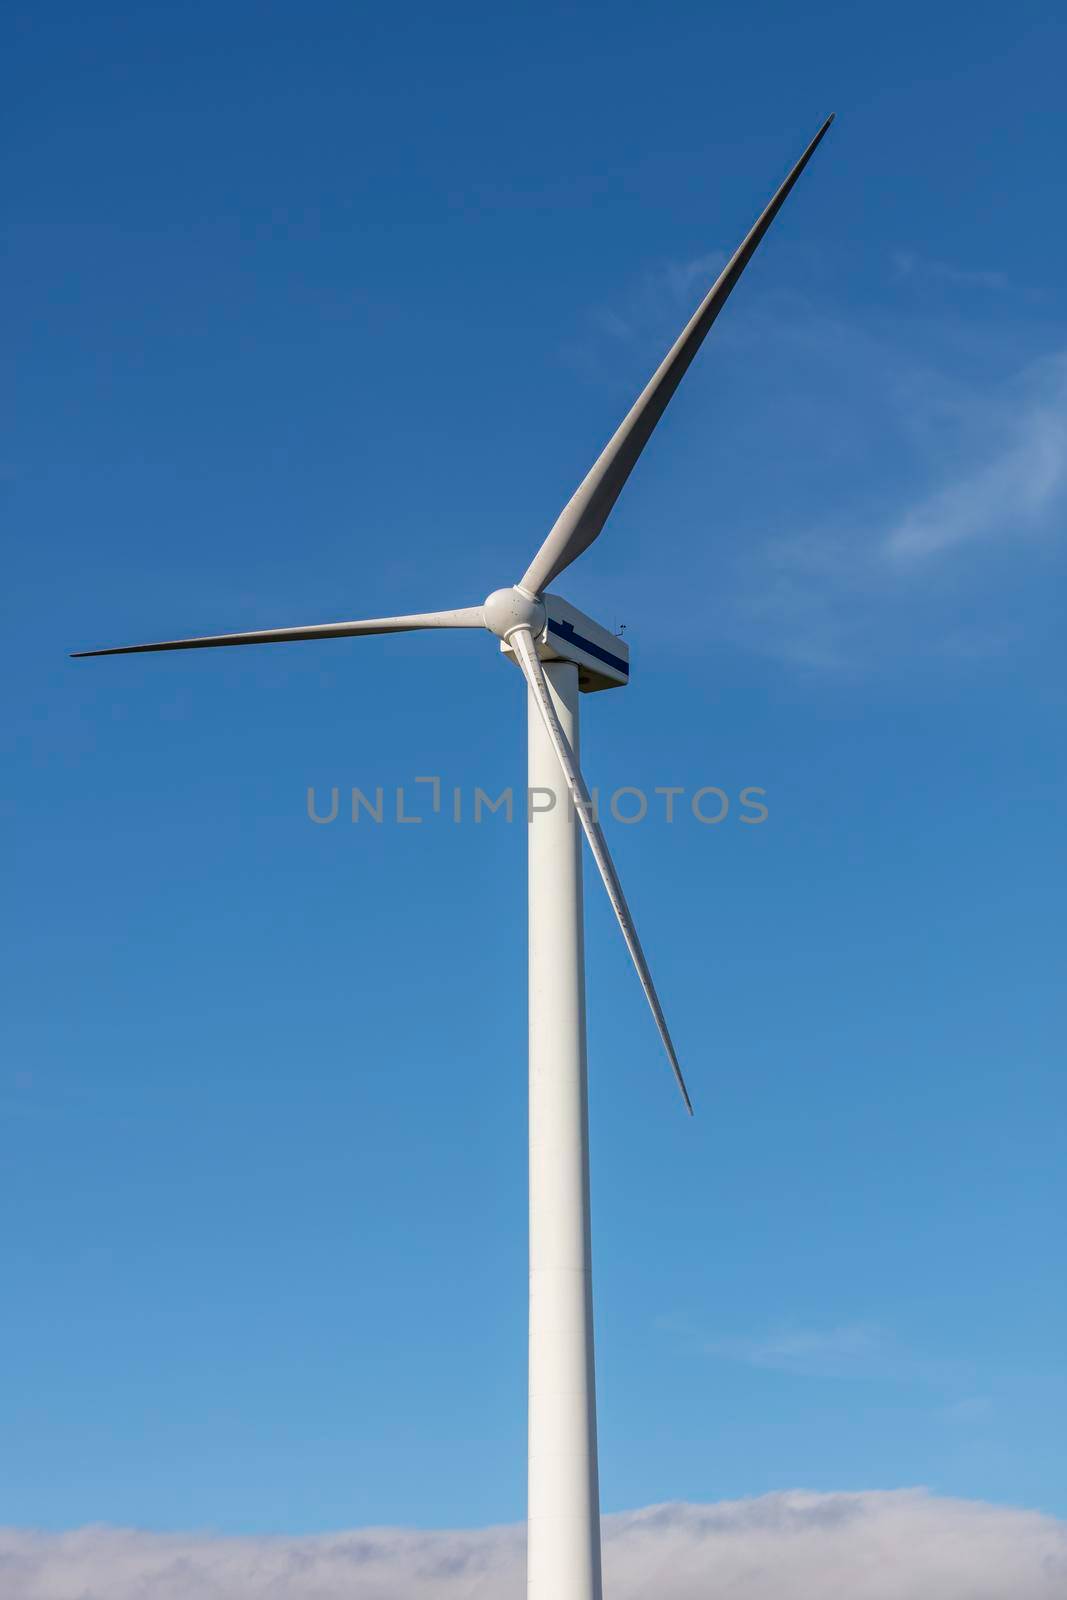 A large three blade industrial wind turbine generating electricity in a wind farm